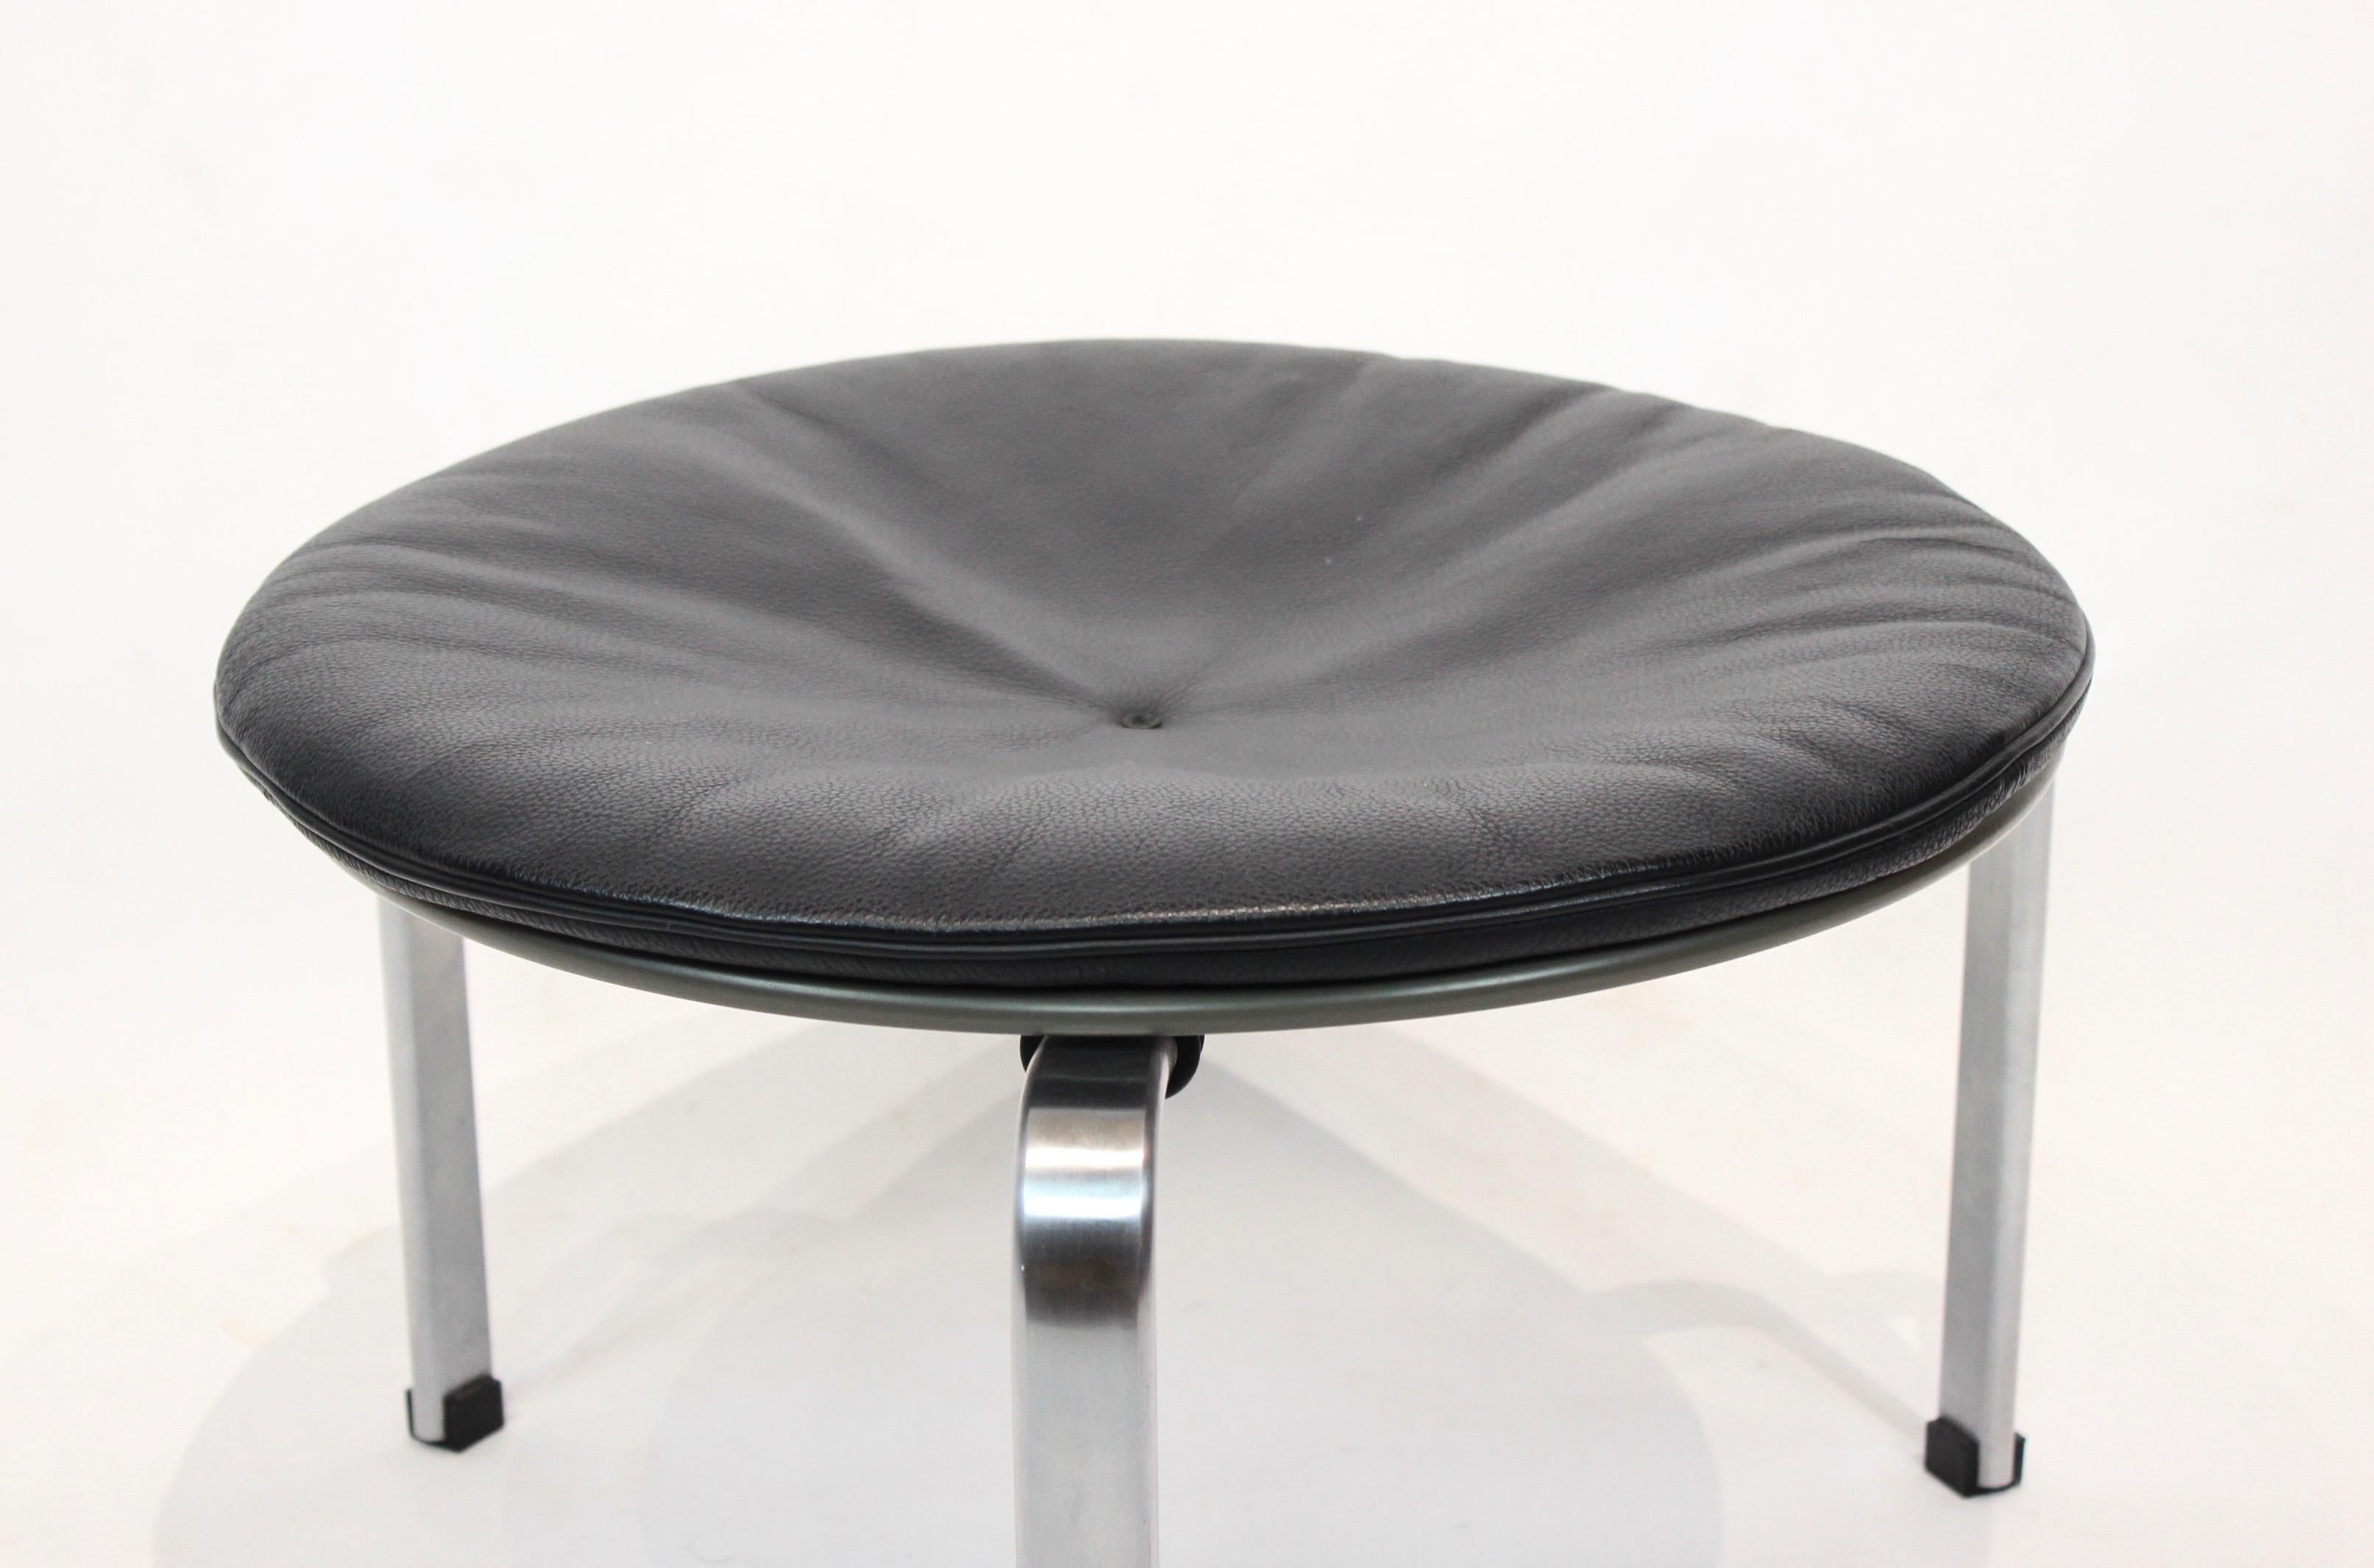 Stool, model PK33, with seat of black leather and frame of matt chrome spring steel, designed by Poul Kjærholm and manufactured by Fritz Hansen in 2004. The stool is in great used condition.